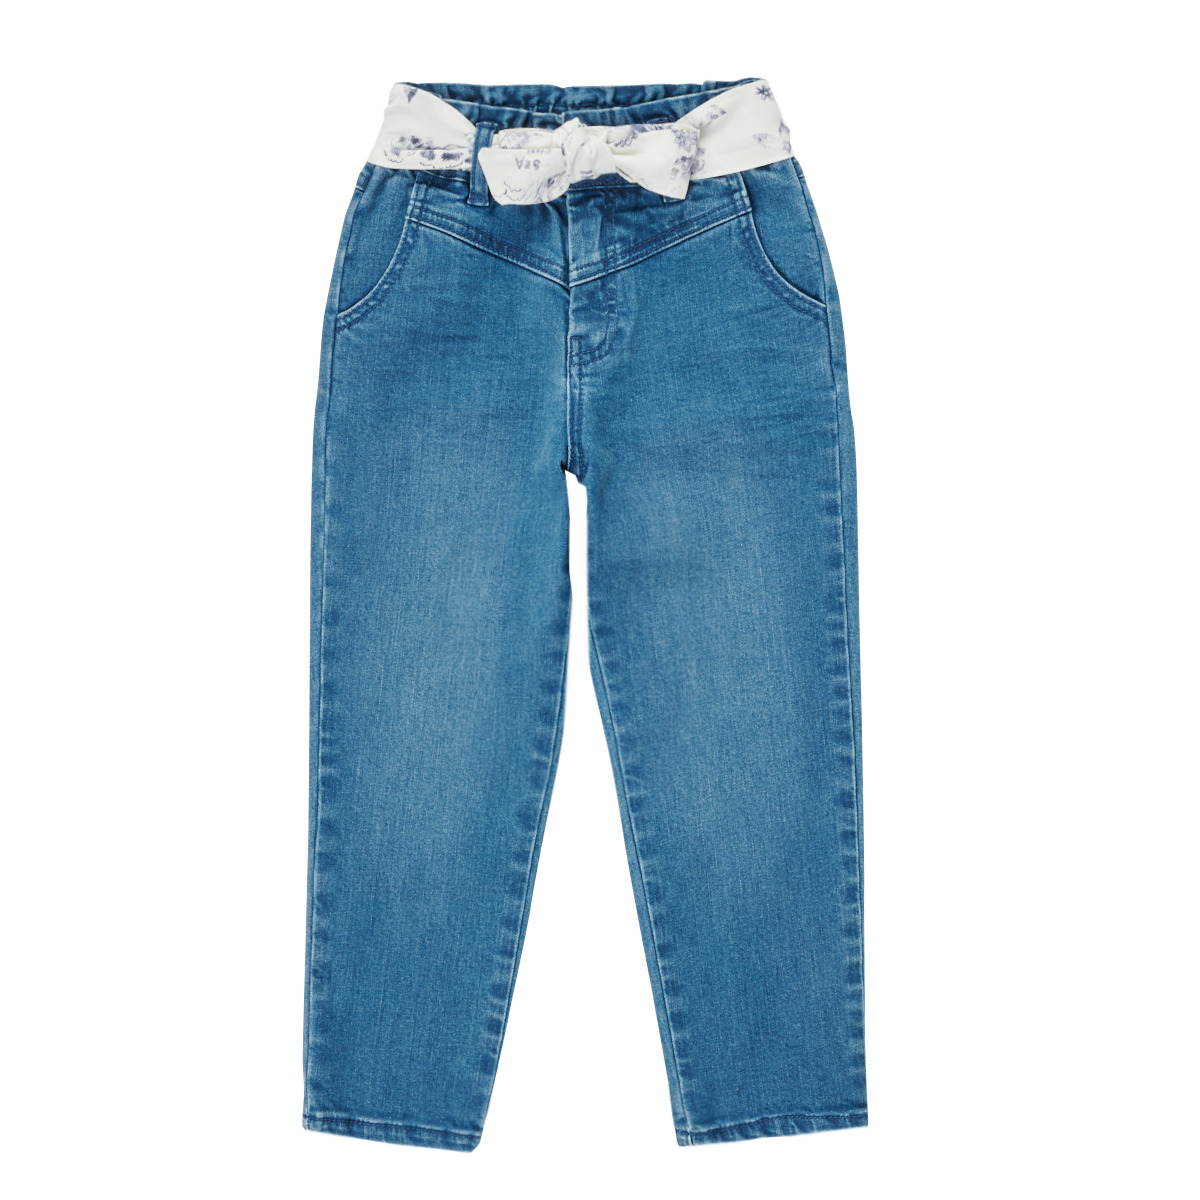 Ikks DOSSUSSET Blue - Fast delivery | Spartoo Europe ! - Clothing straight jeans  Child 64,00 € | Weite Jeans